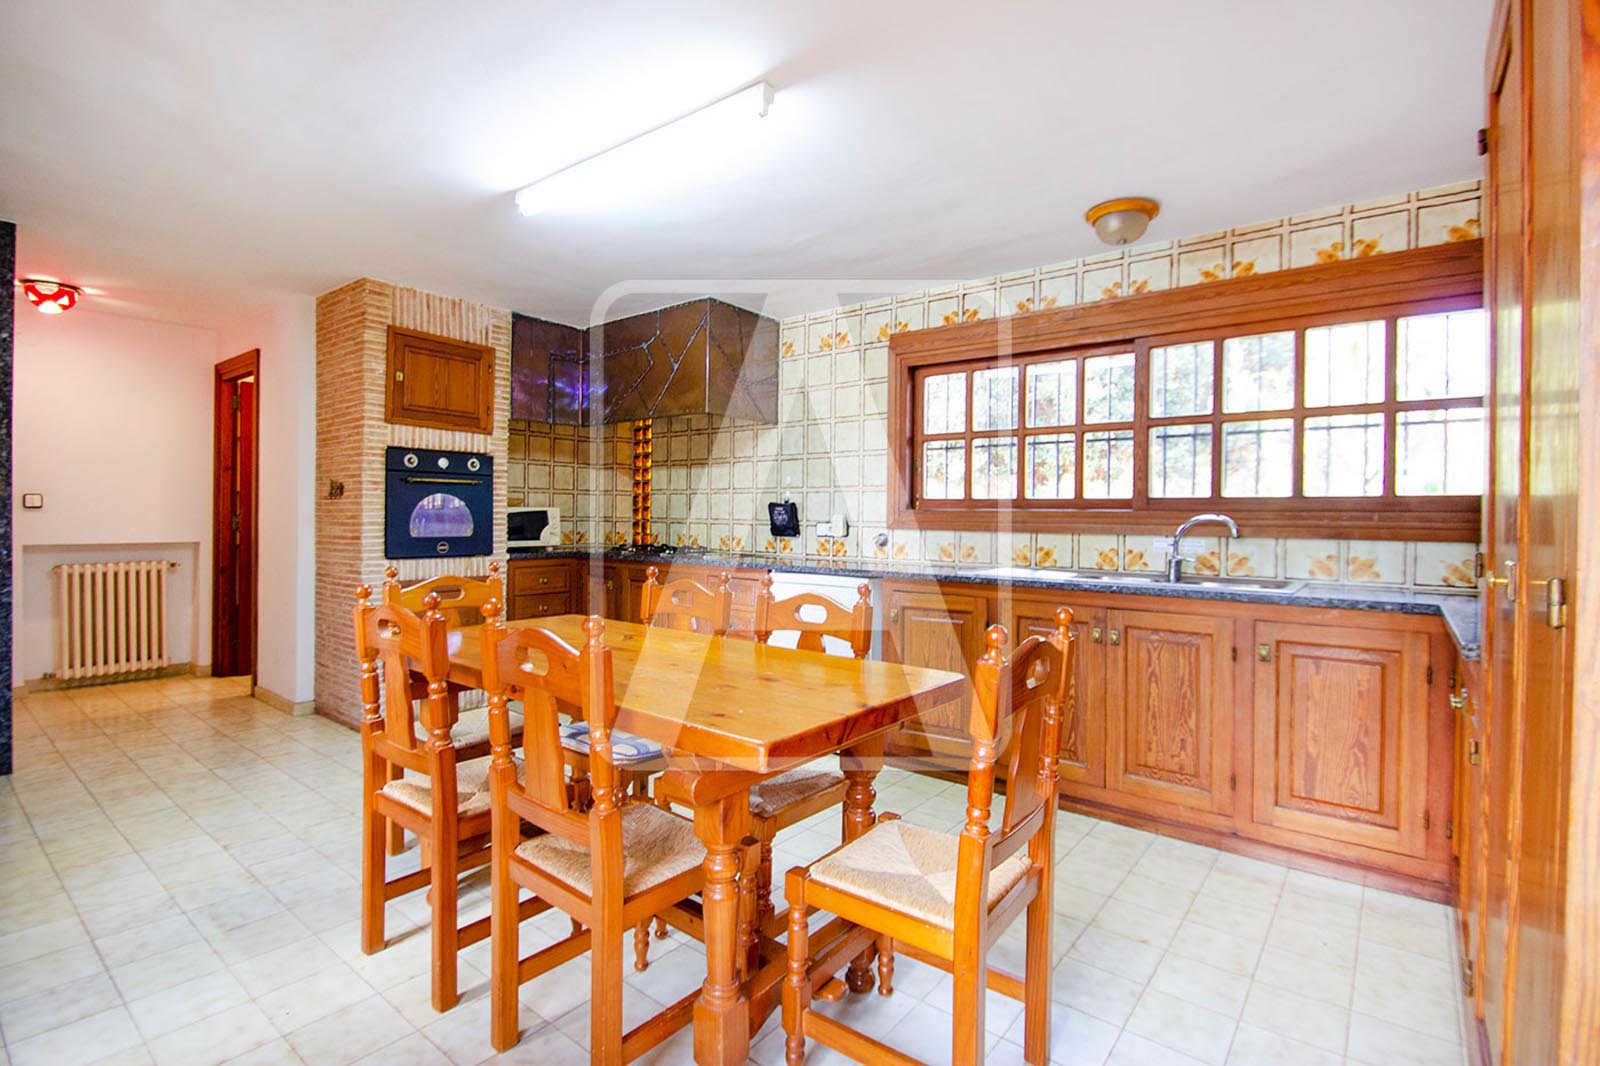 Countryhome for sale in Alicante 29